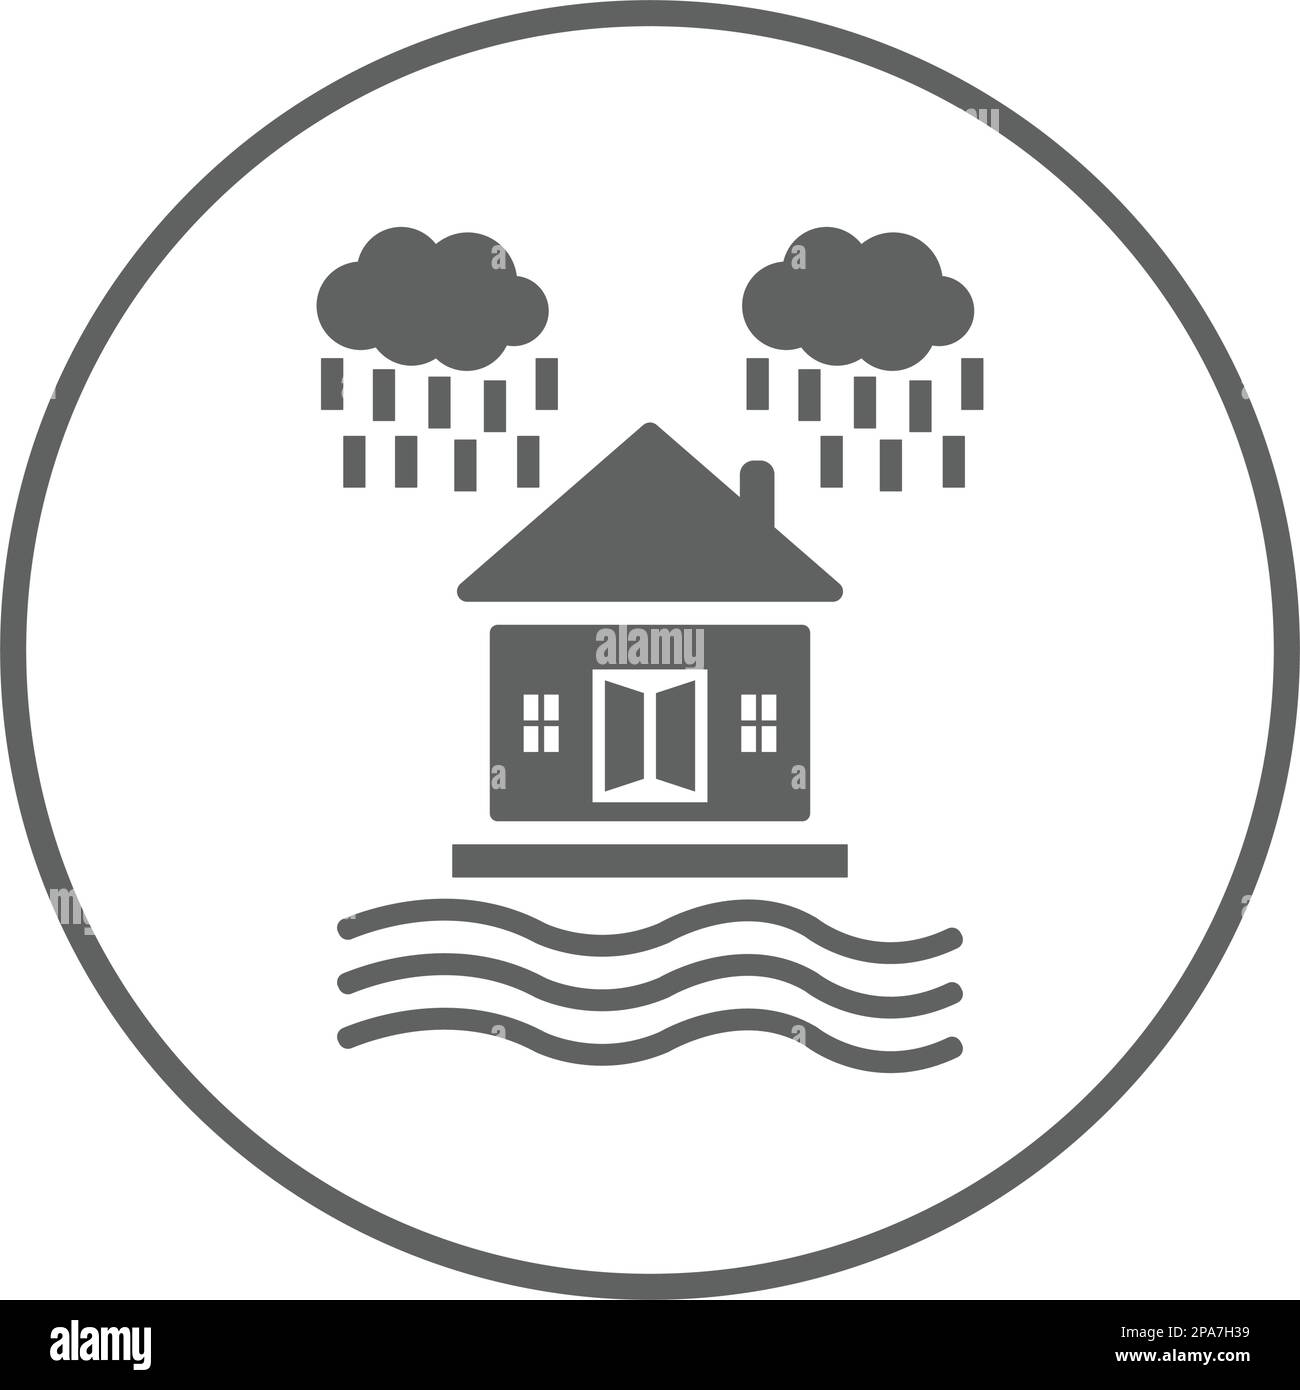 Disaster, flood, home insurance, water icon. Use for commercial, print media, web or any type of design projects. Stock Vector